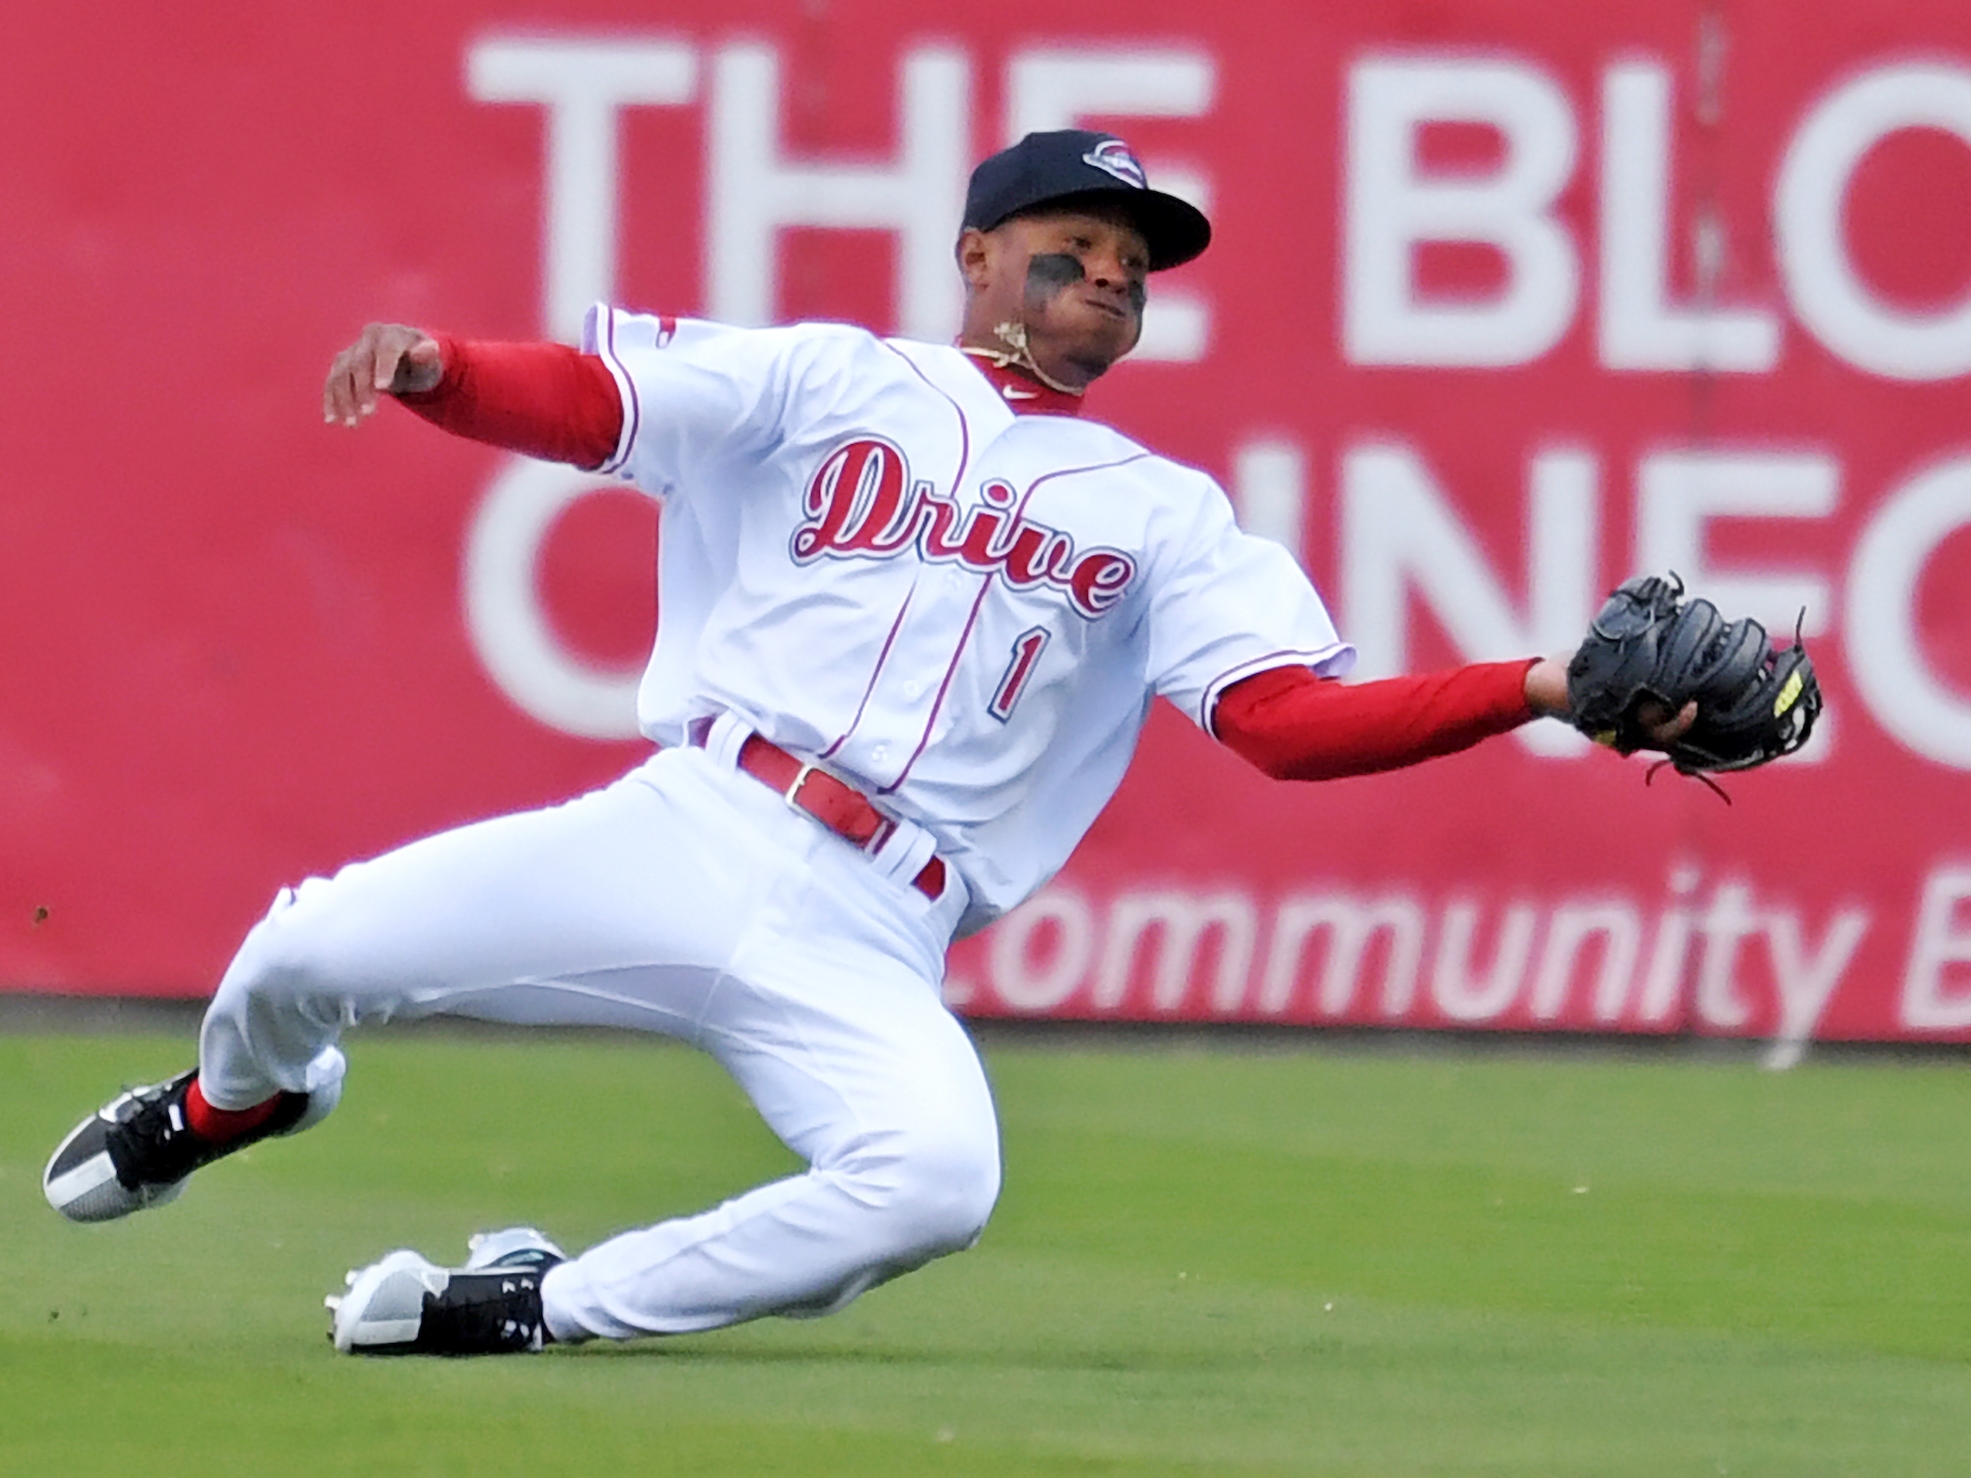 Red Sox prospect Marcelo Mayer hits first homer of season for Greenville  Drive